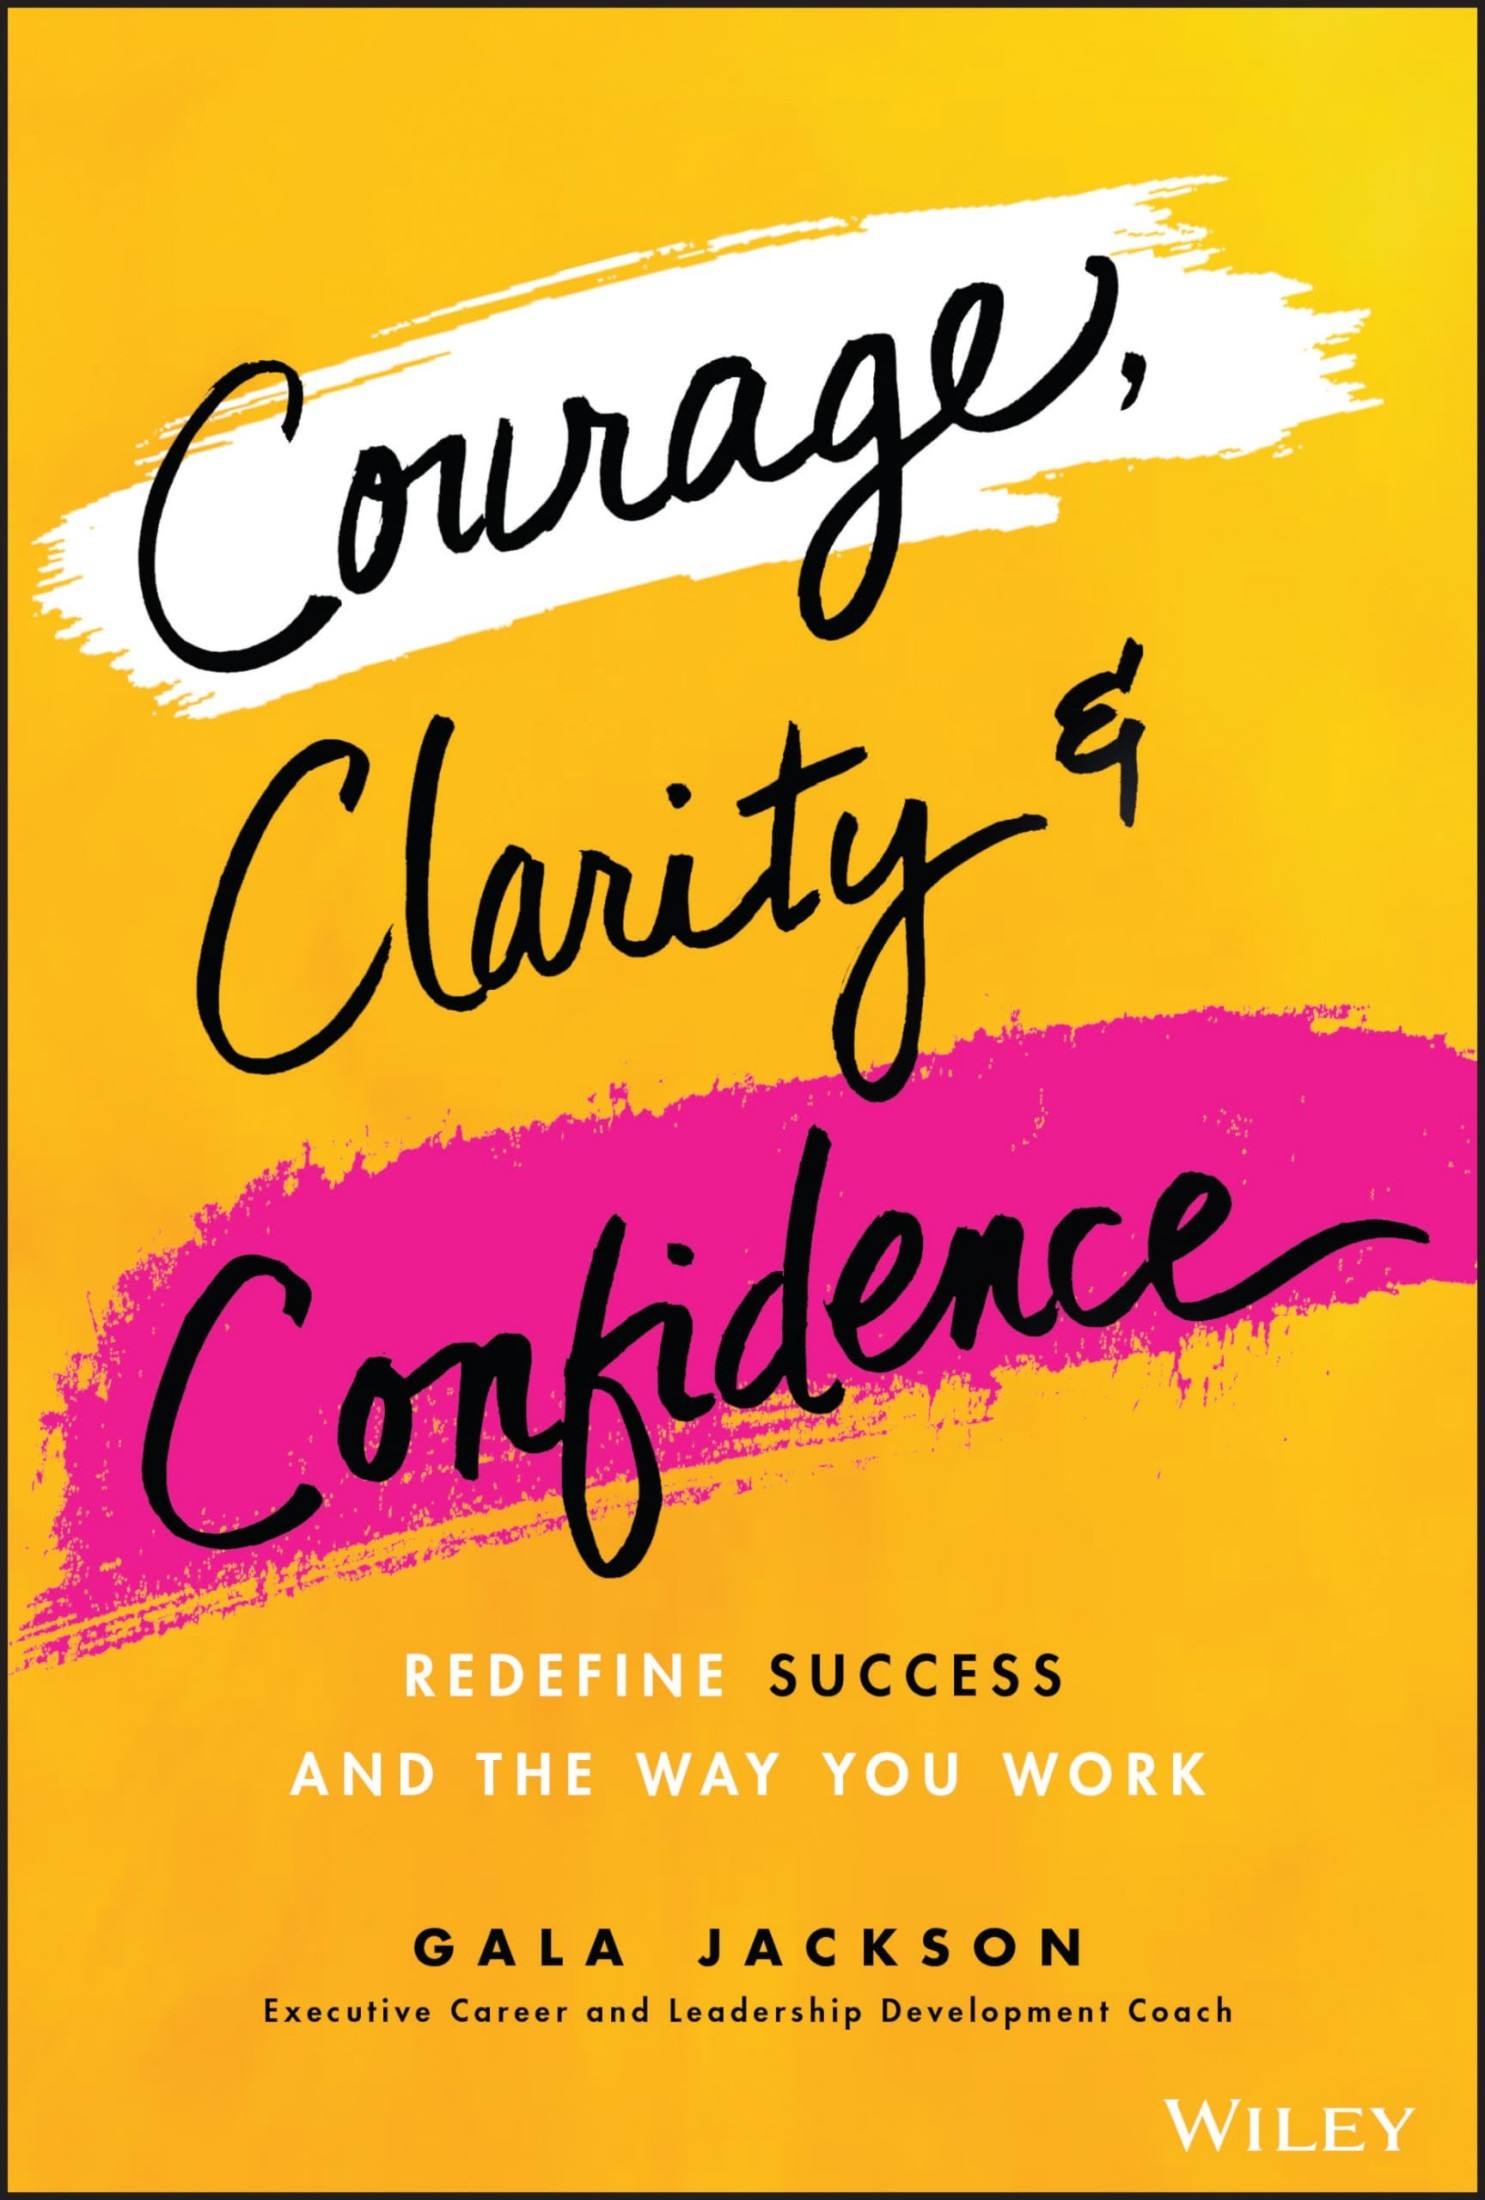 Courage, Clarity, and Confidence: Redefine Success and the Way You Work